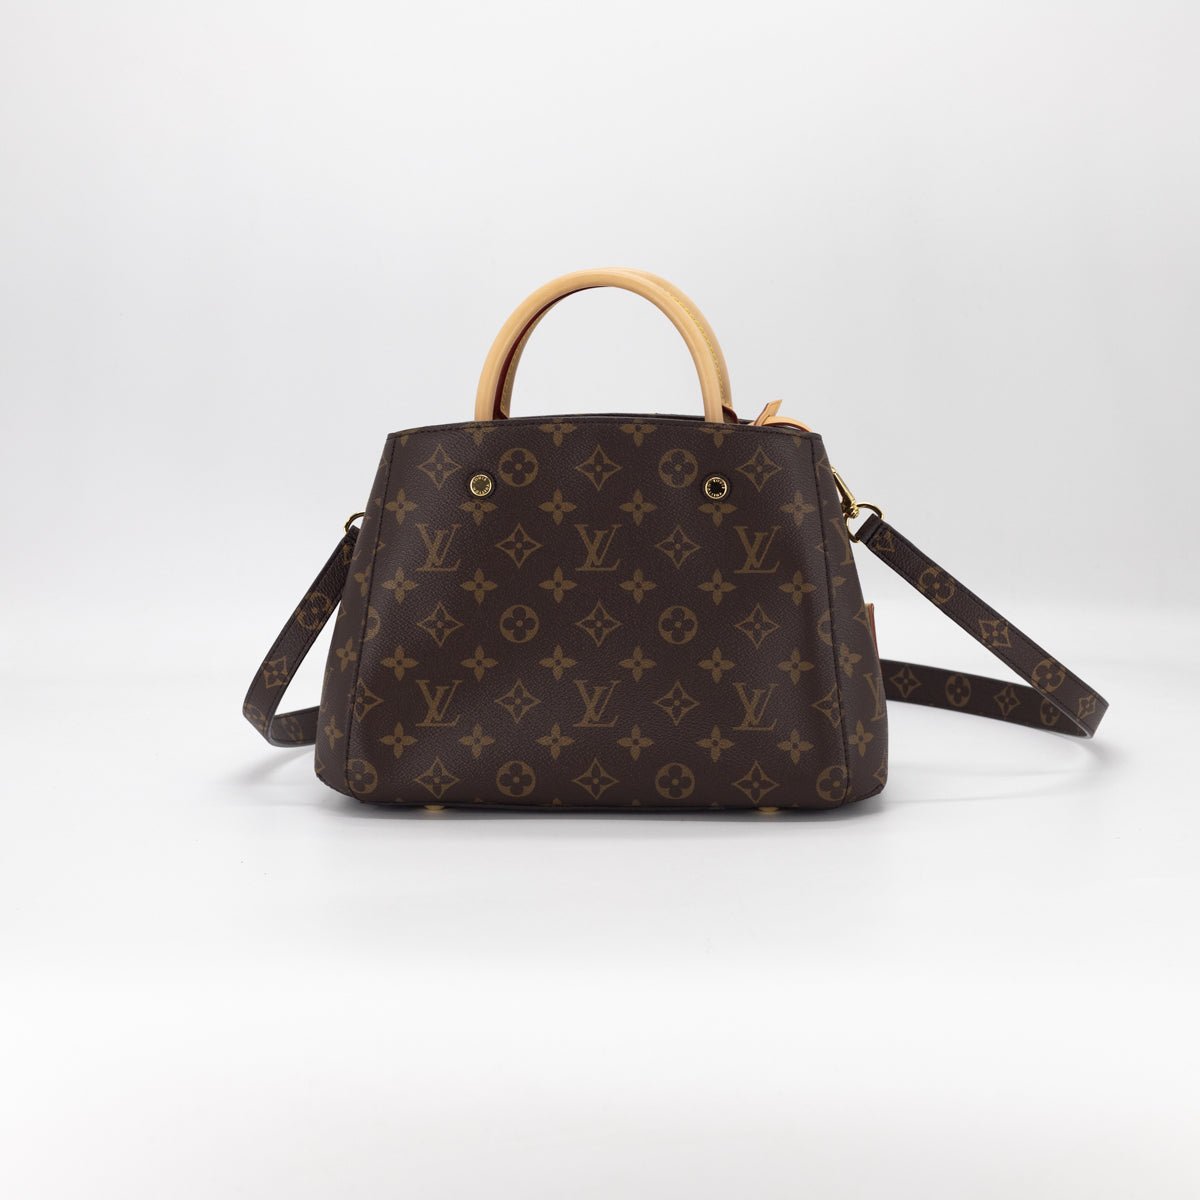 The Louis Vuitton Montaigne BB seems underrated to me! Love this